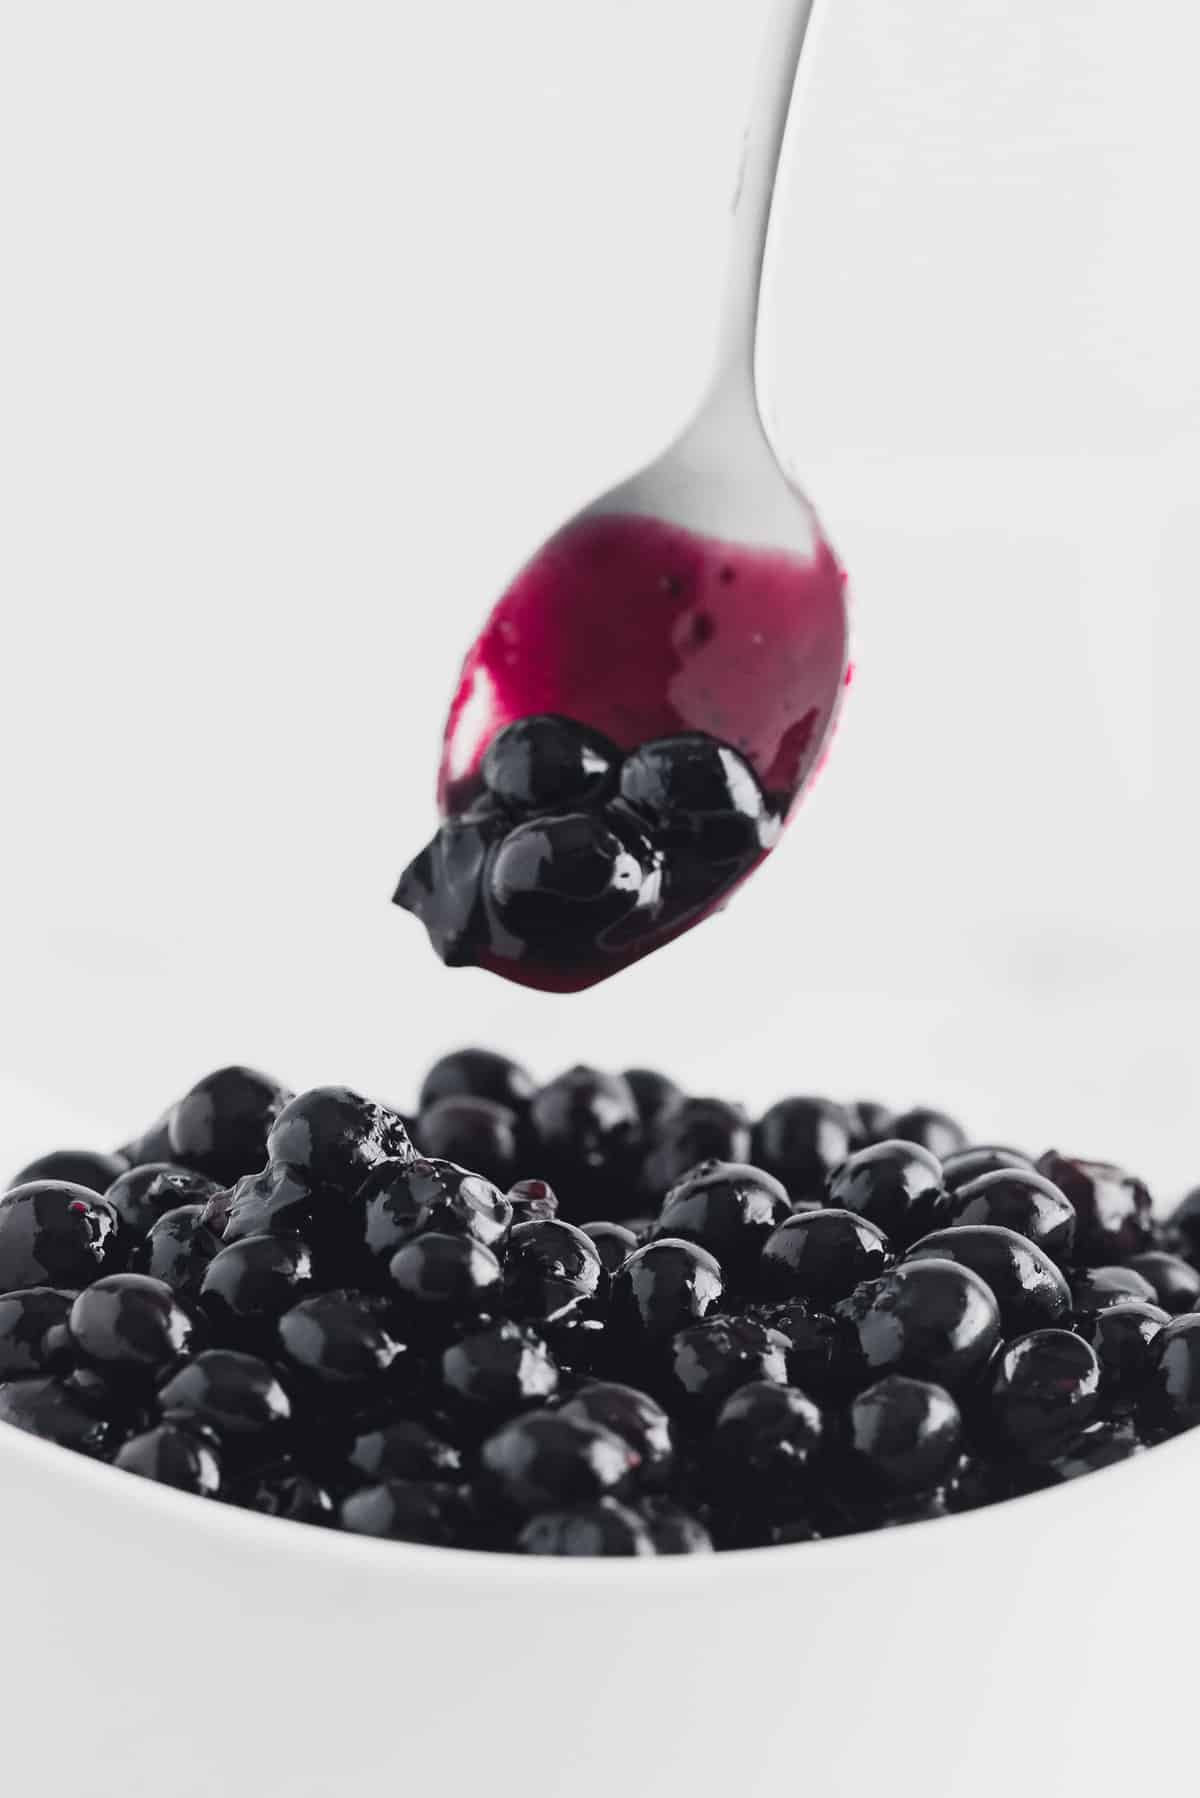 Blueberry sauce in a bowl and on a spoon.